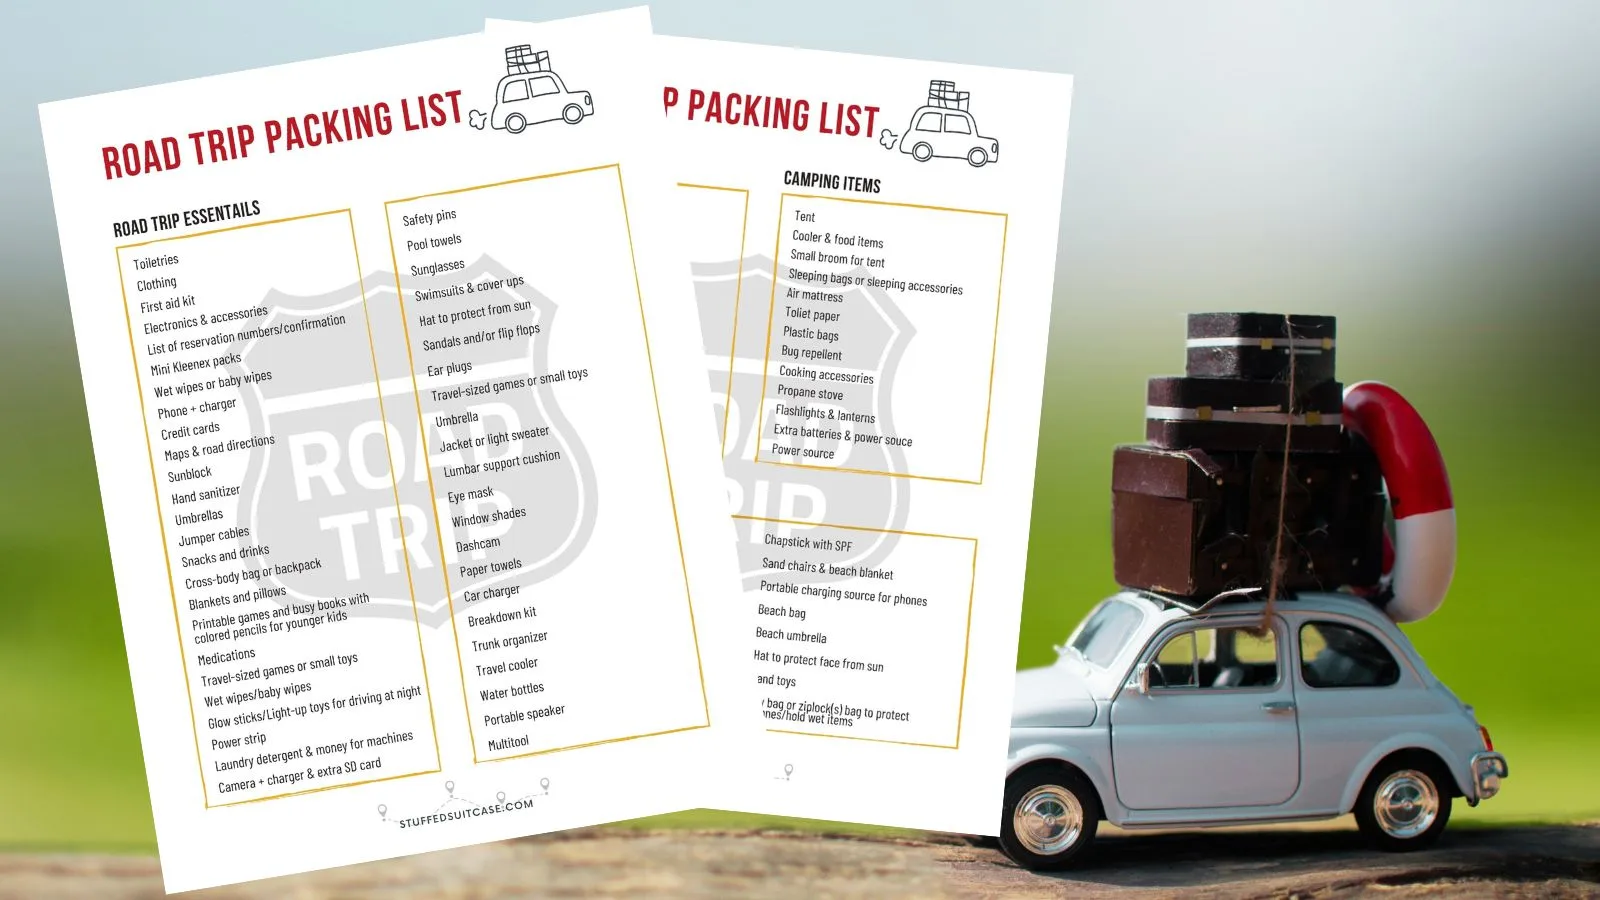 screenshots of road trip packing list printable over image of miniature car